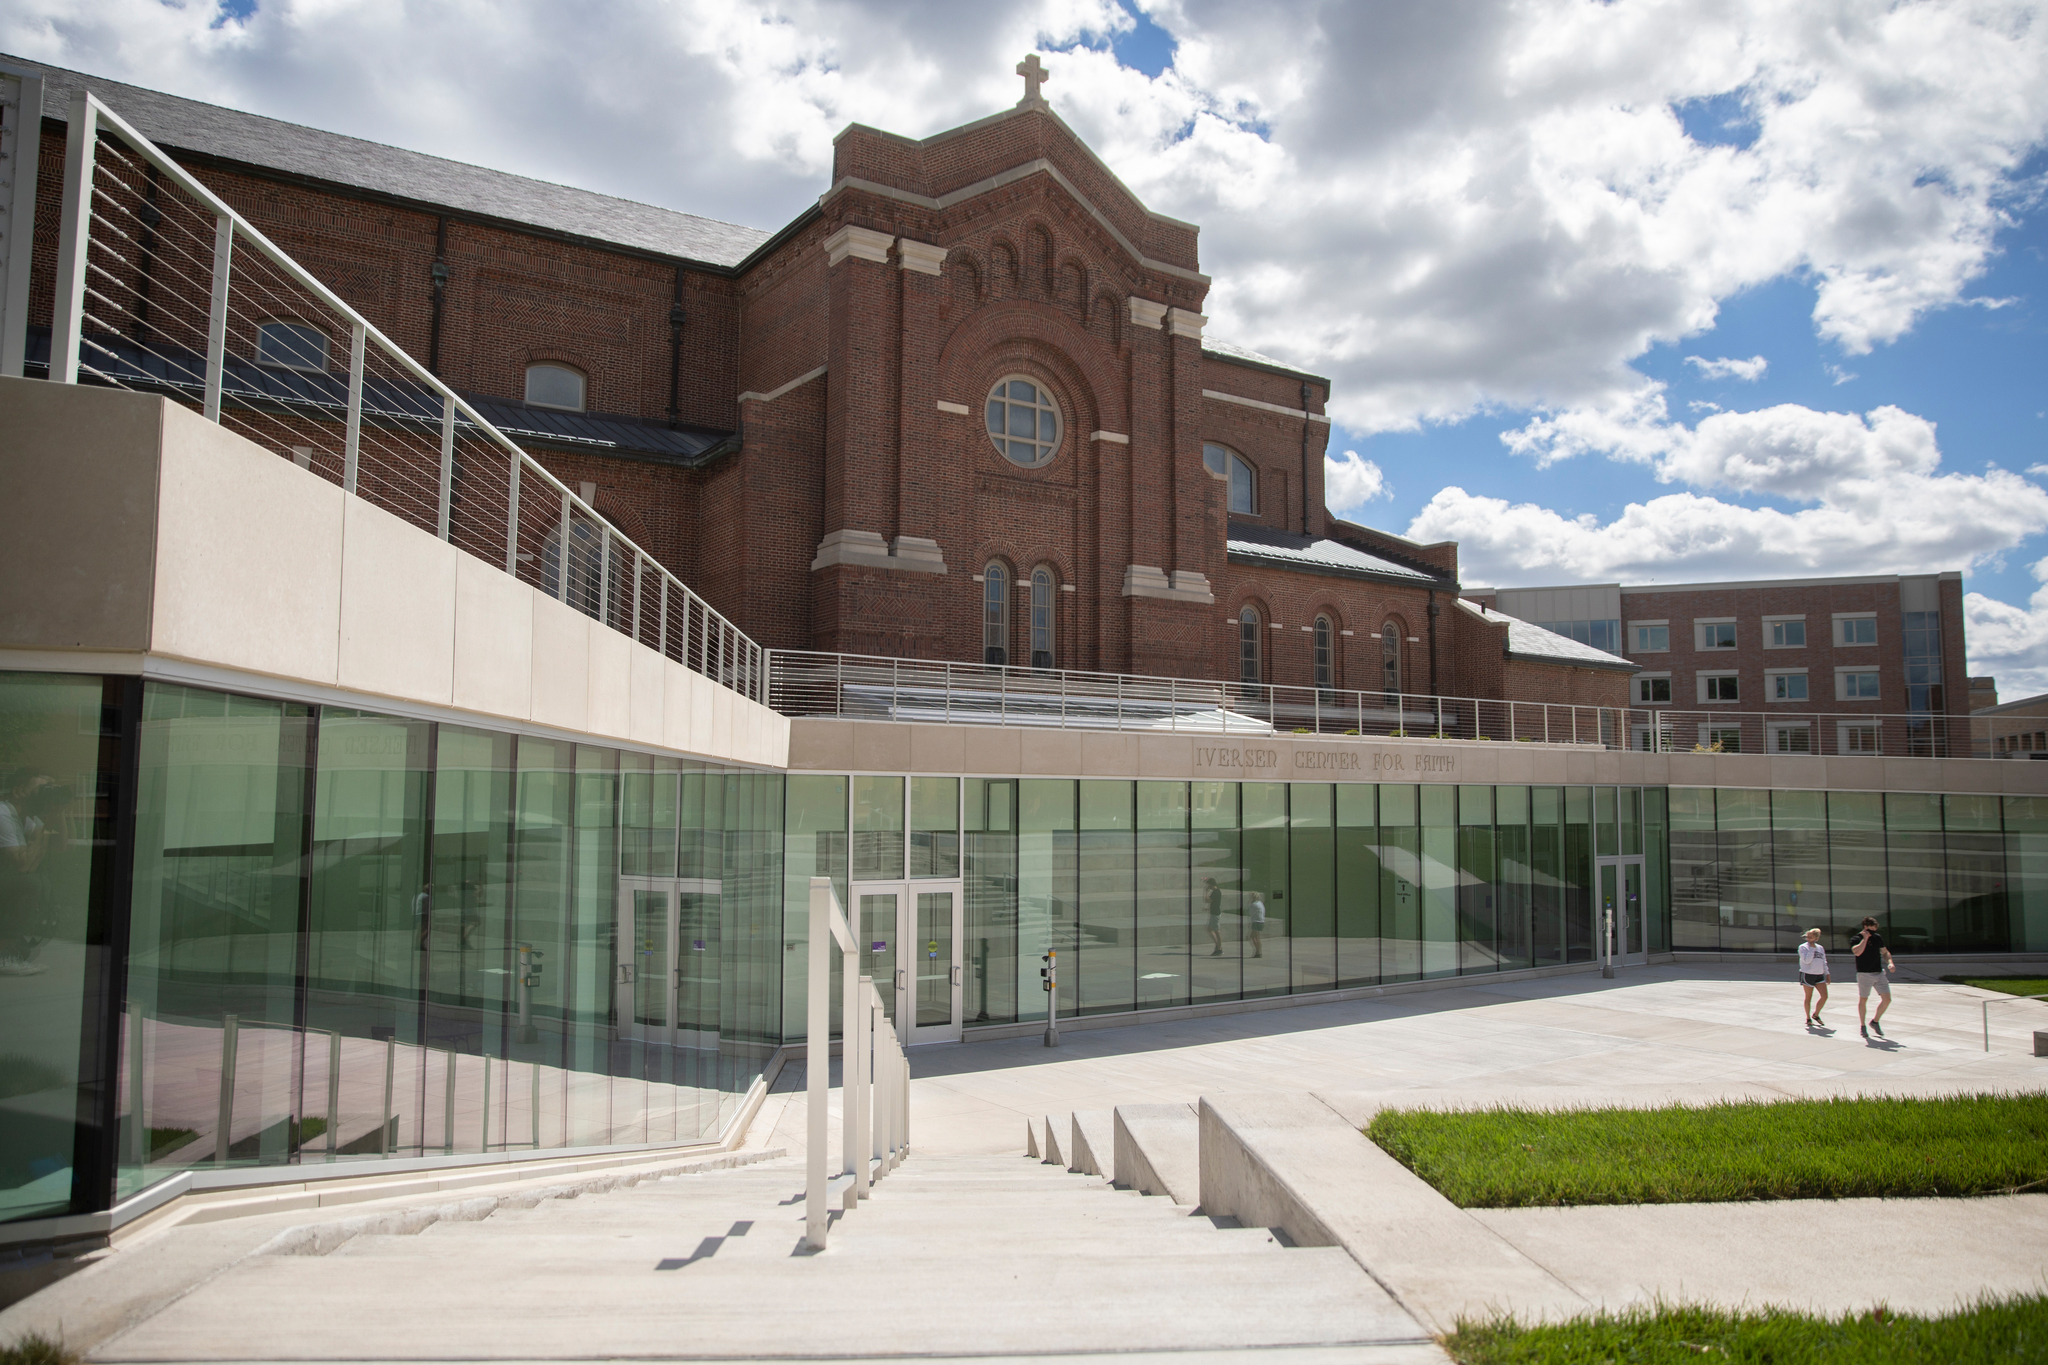 The exterior of the newly completed Iversen Center for Faith on the St. Paul campus, as seen on September 3, 2020.